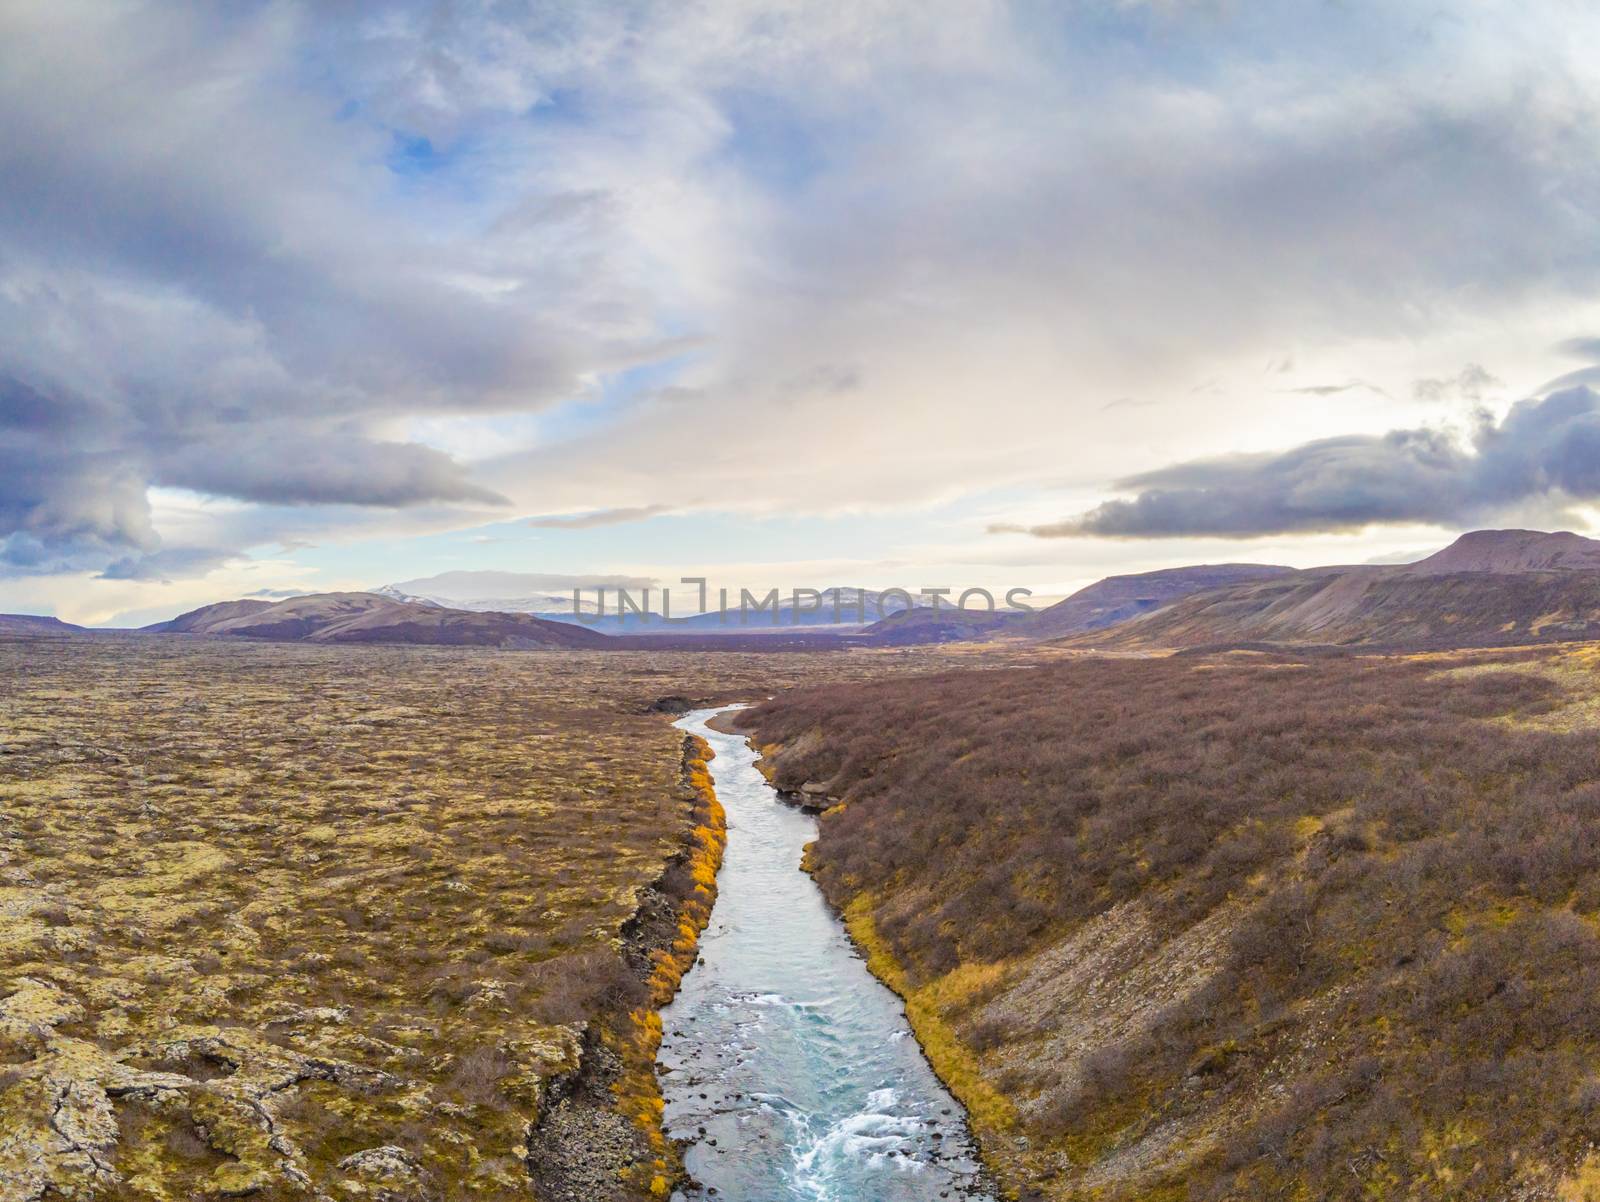 Hraunfossar series of waterfalls barnafoss aerial image of turquoise water next to lava field and the highlands of Iceland by MXW_Stock